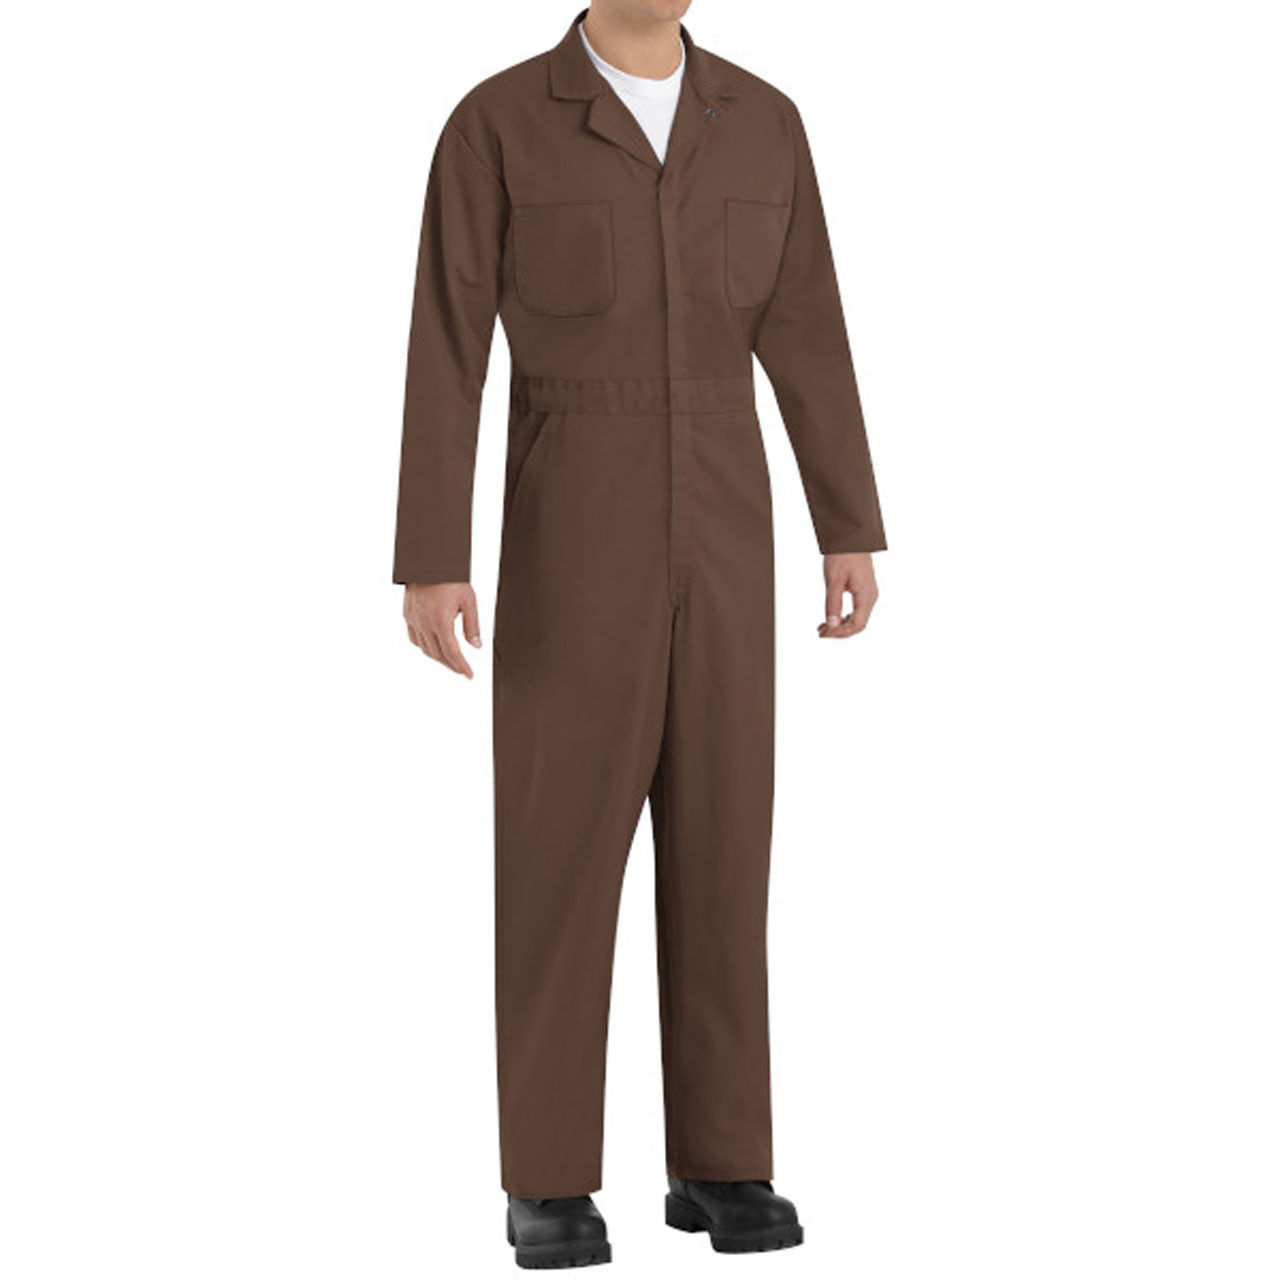 Is the fit comfortable for the brown coveralls?